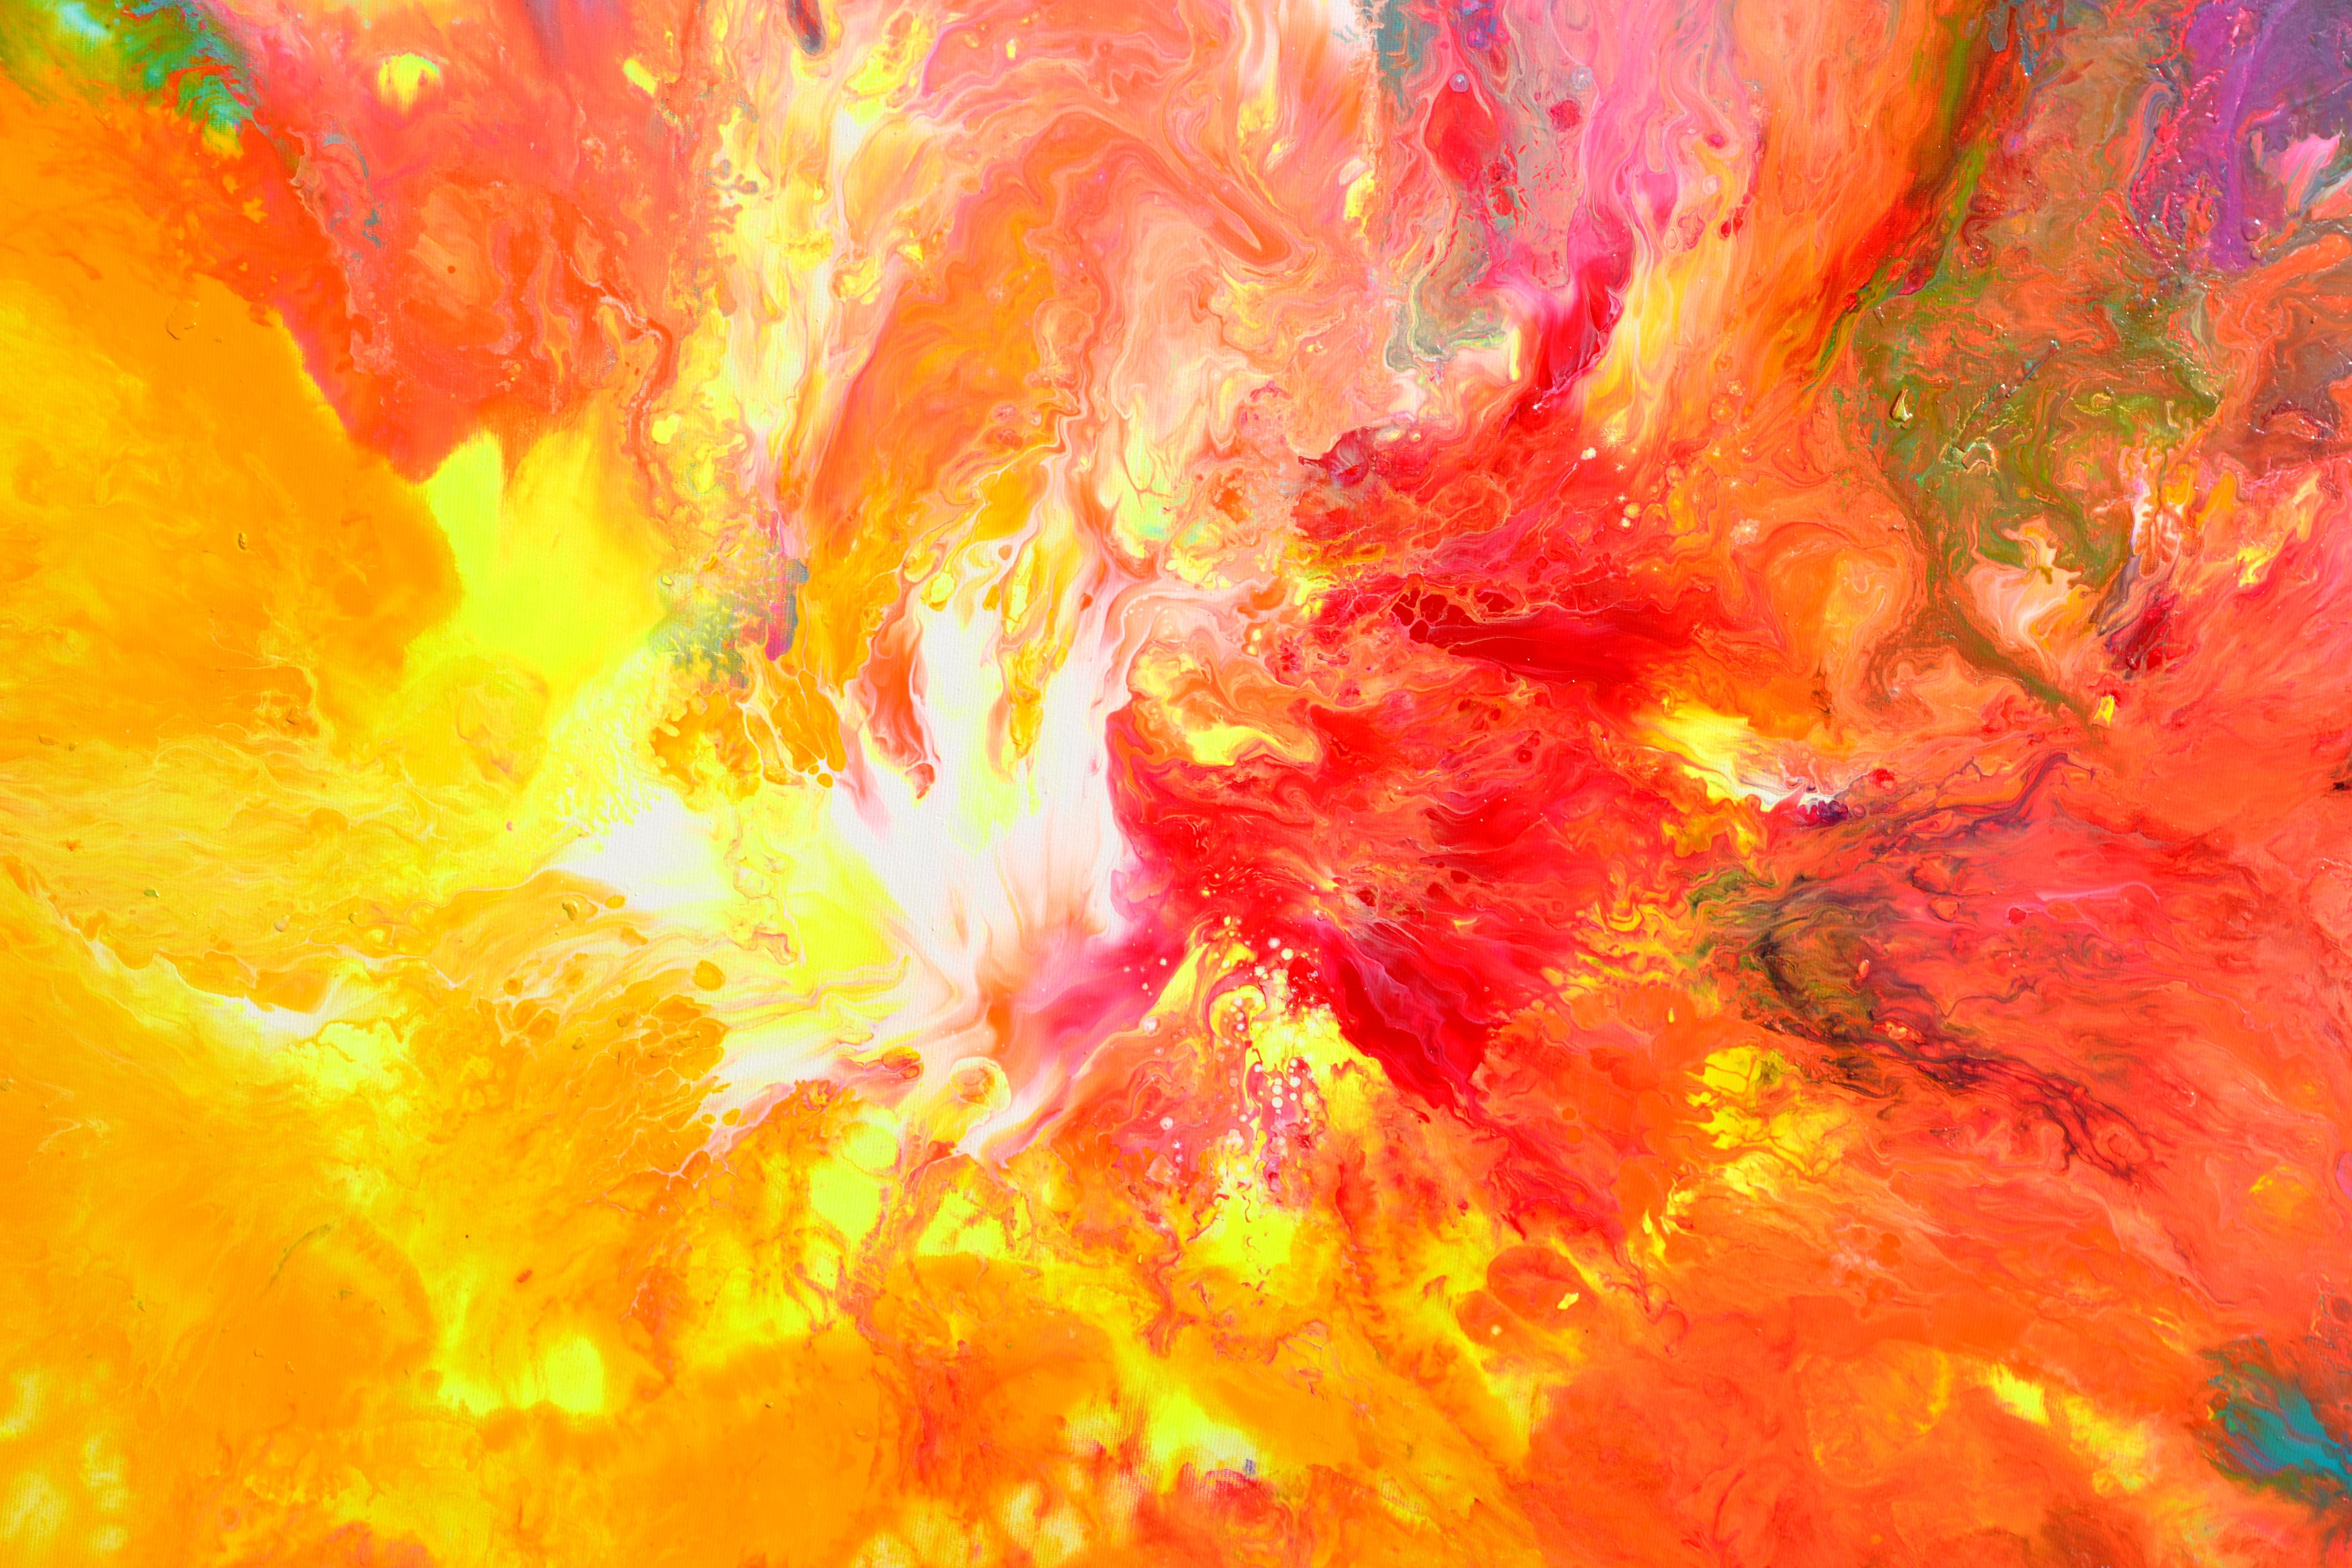 This amazing piece of art is part of Water meets Fire collection, very dynamic, colorful, vivid and harmonized compositions, made of puring fluid varnished acrylics on stretched canvases.
Ready to hang with the edges painted - GALLERY 3D